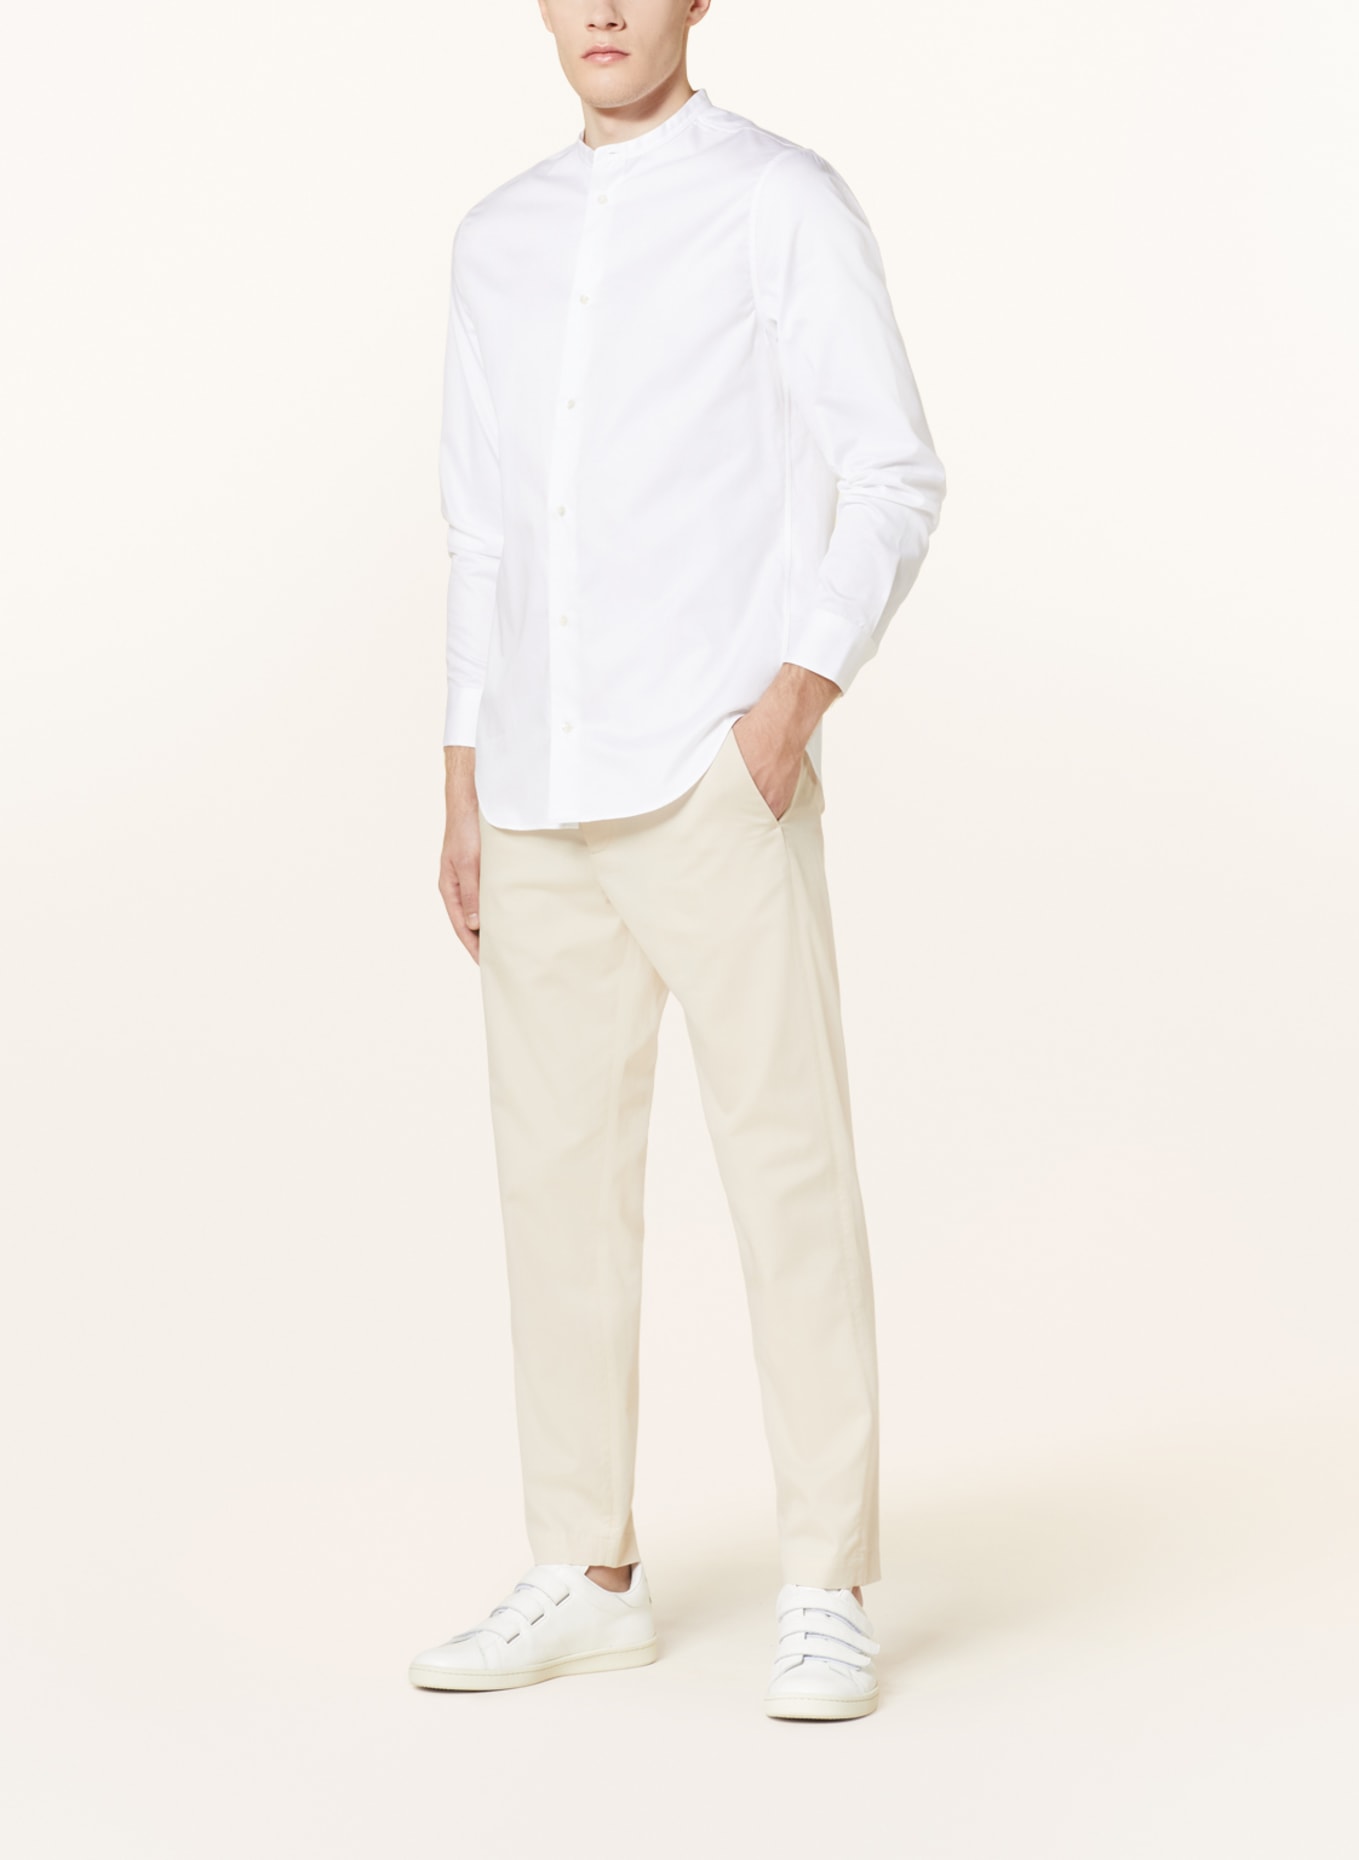 COS Shirt regular fit with stand-up collar, Color: WHITE (Image 2)